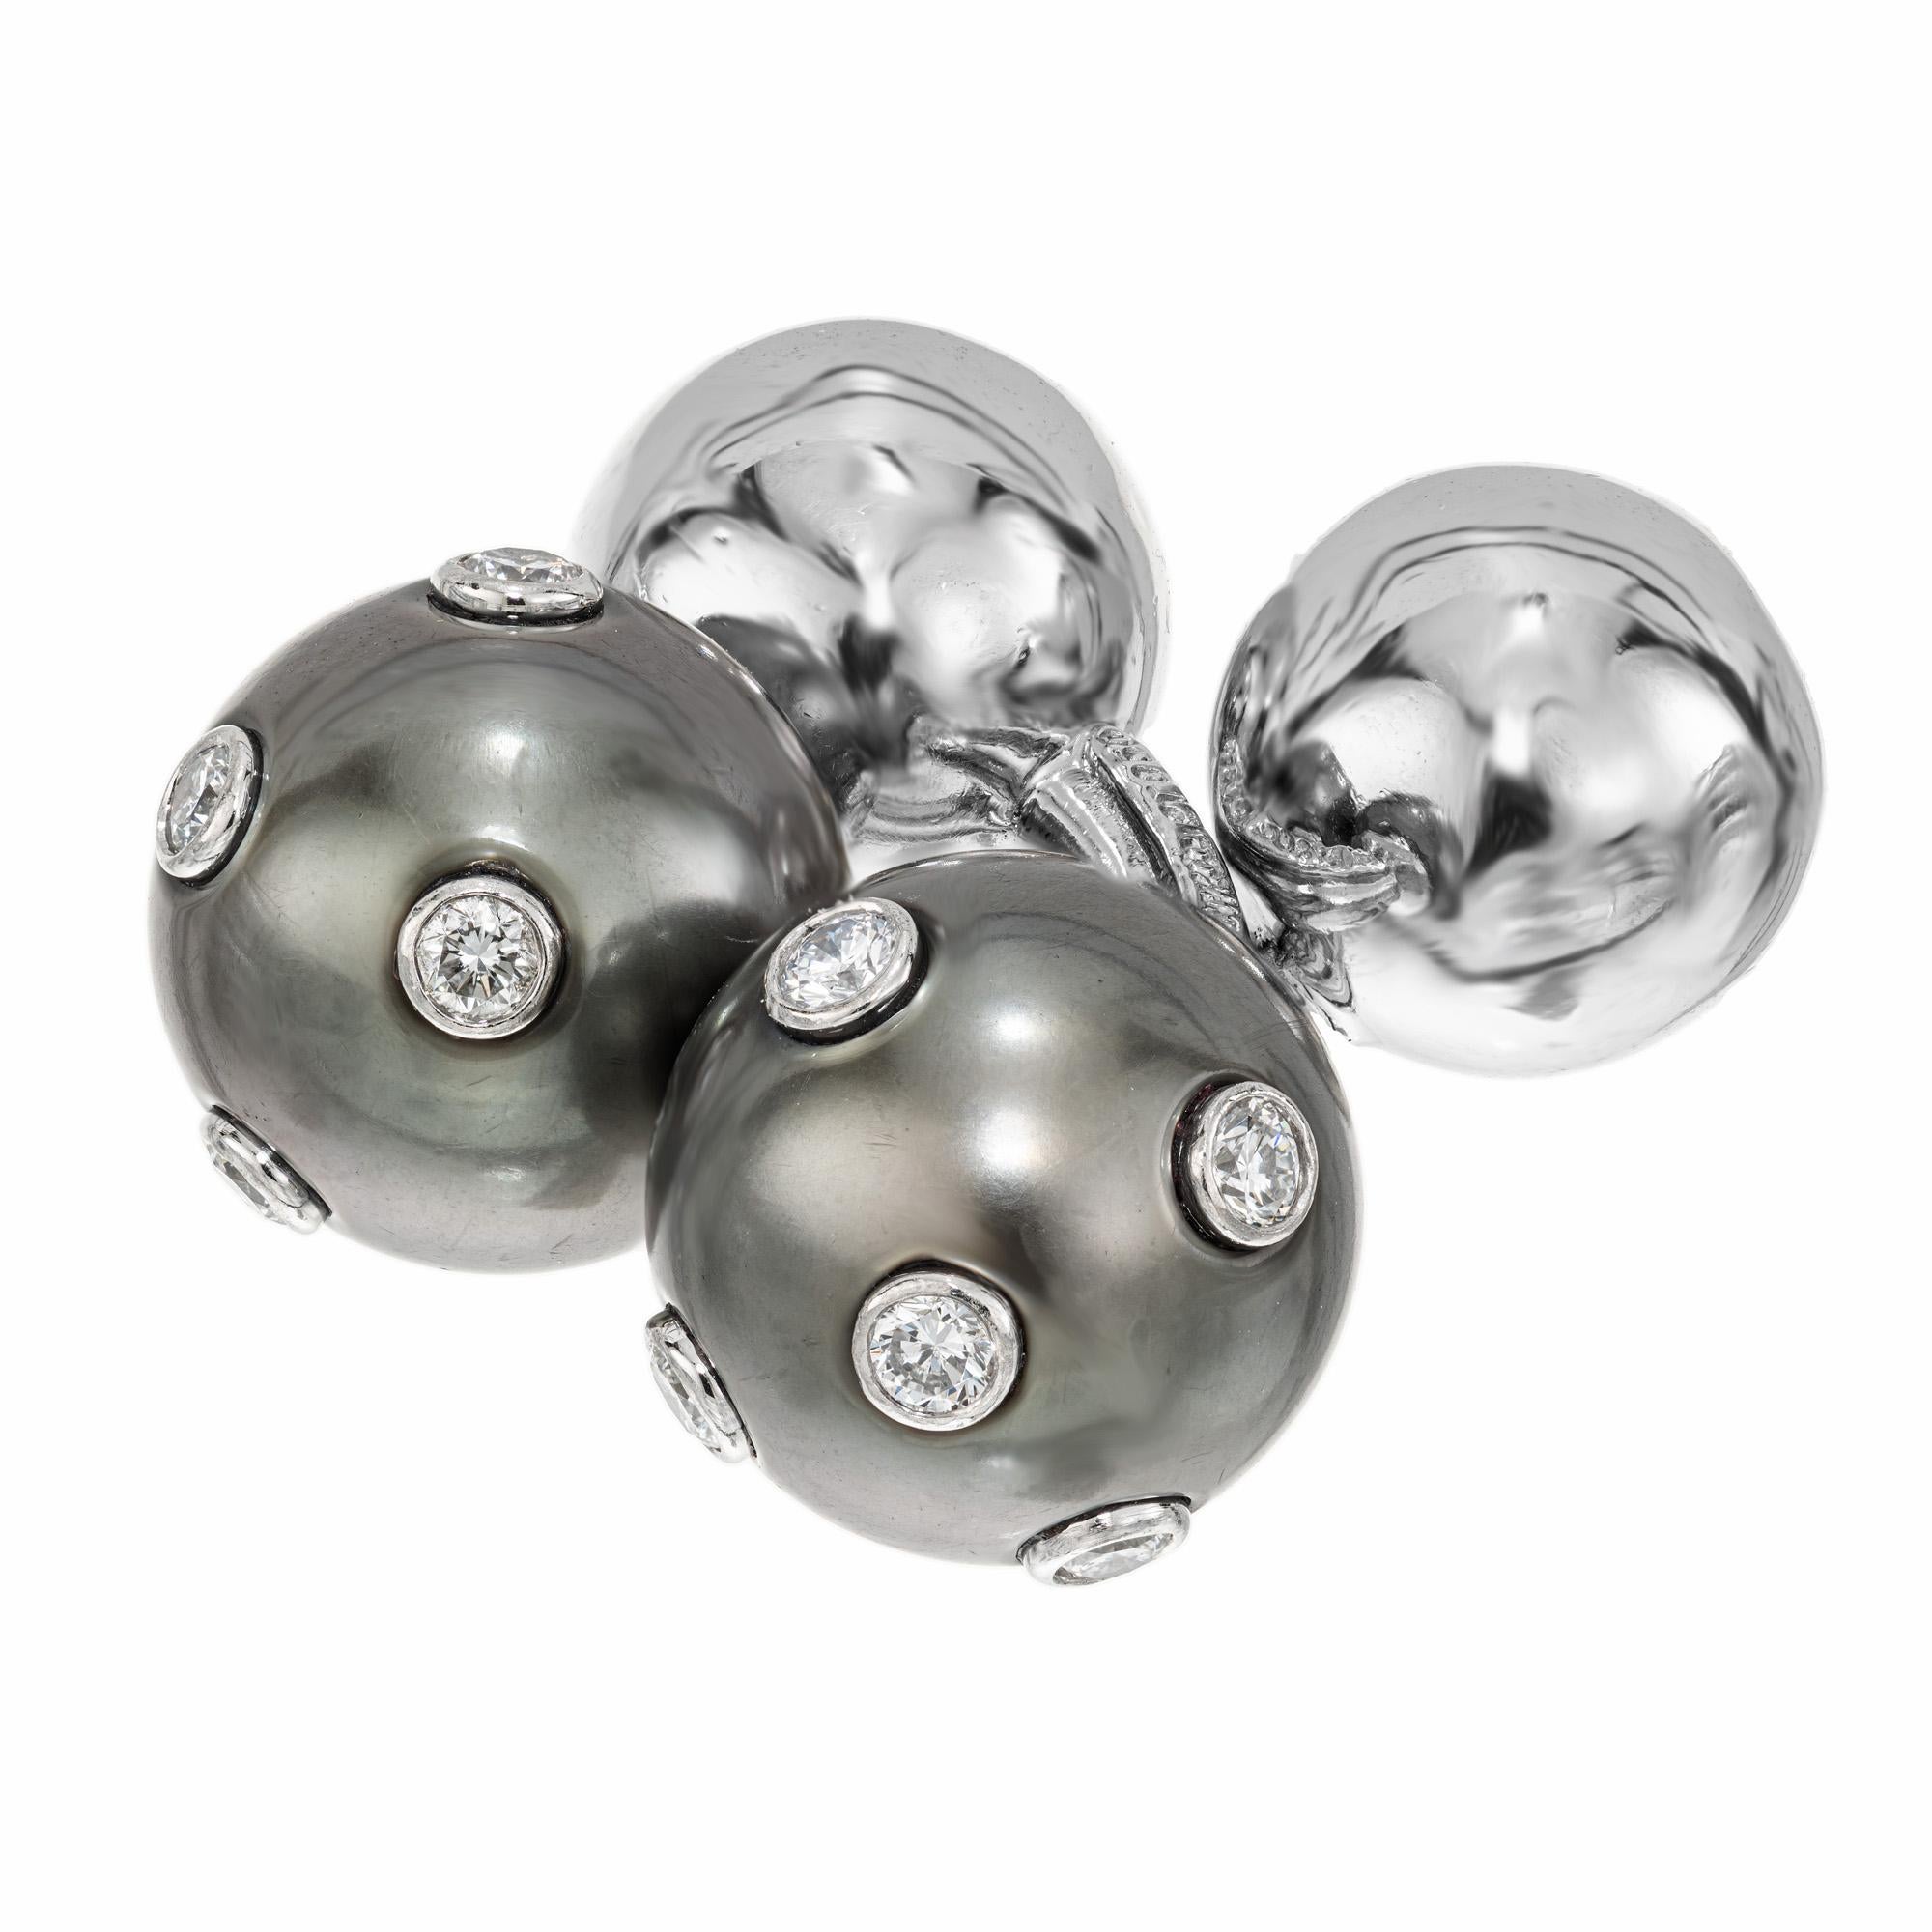 Black pearl and diamond Tiffany & Co. cufflinks.  Theses cultured black pearl platinum barbell cufflinks are decorated with 10 round bezel set diamonds, totaling .20cts. on one end. On the apposite end are platinum balls. Another example of